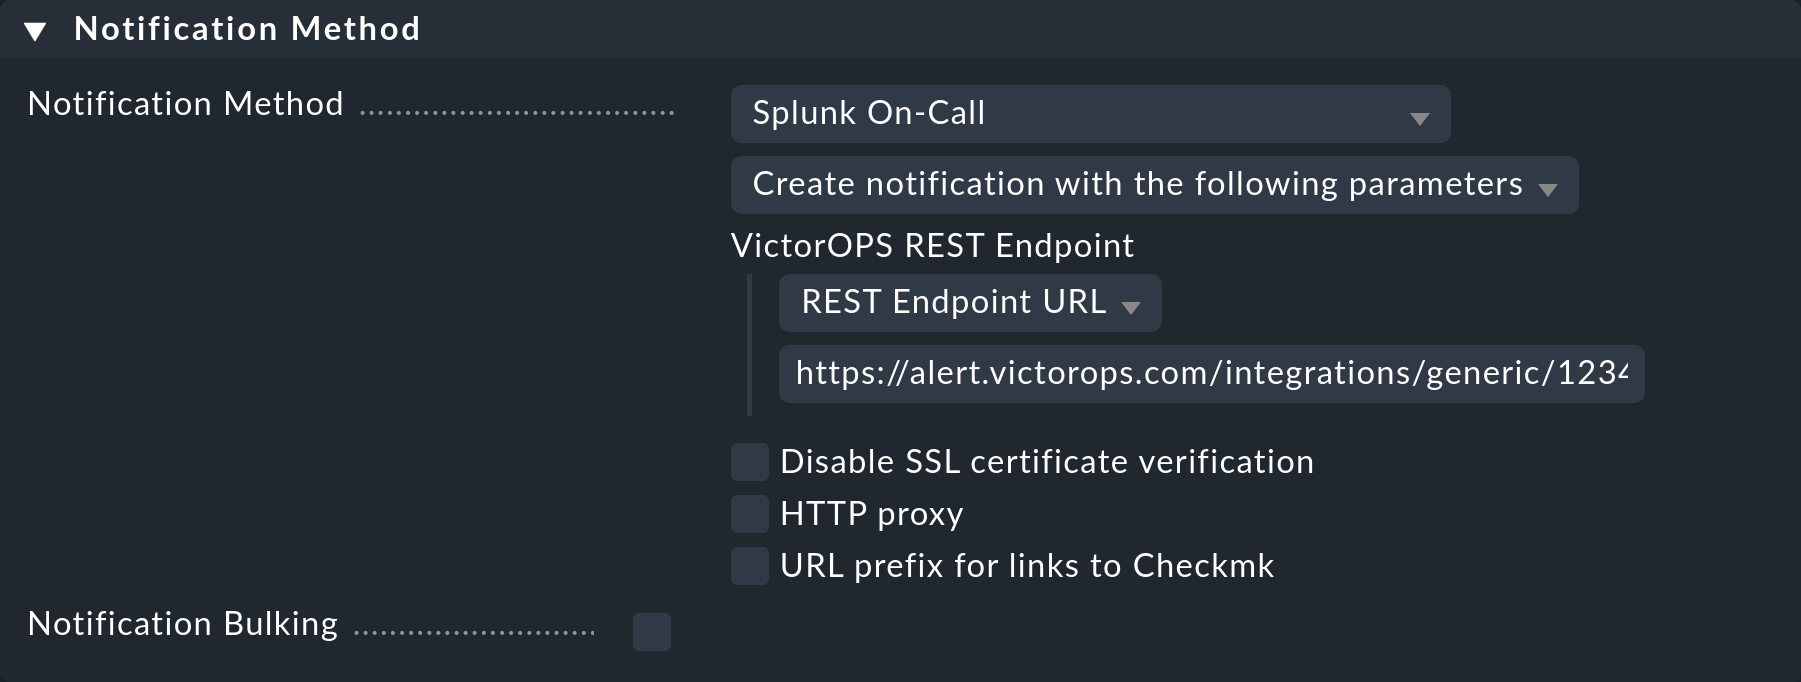 The notification method settings for Splunk On-Call.